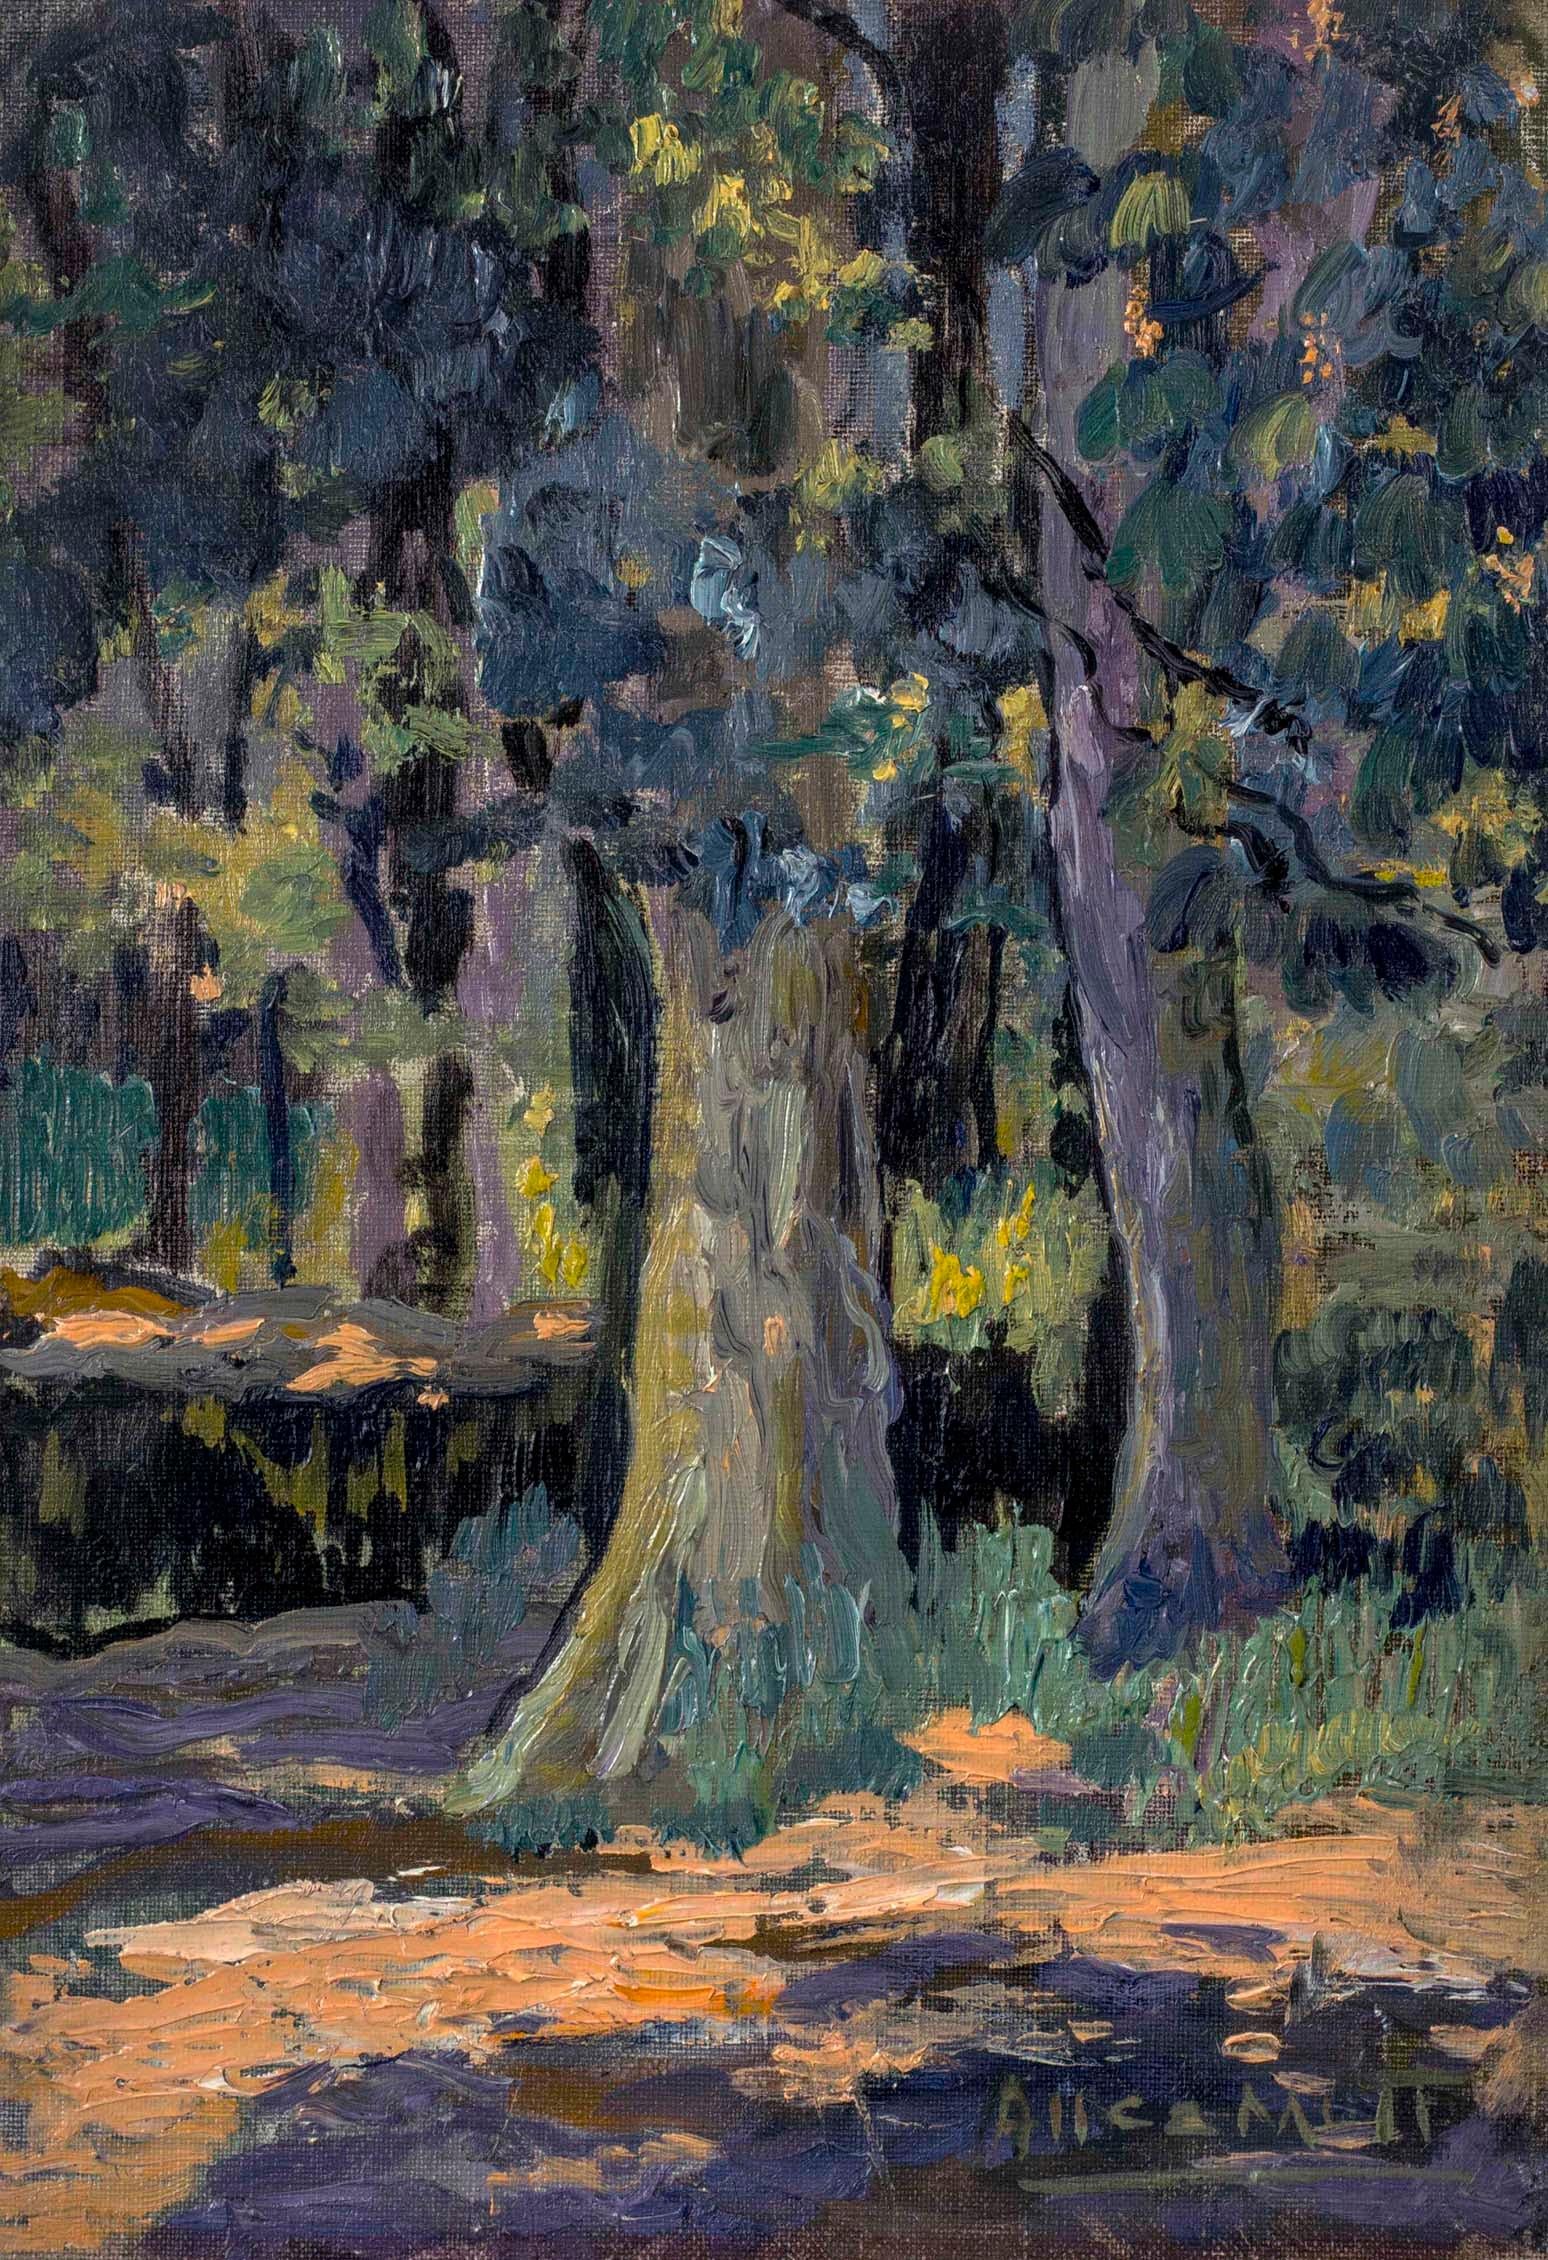 Cypress Trees, 20th Century Landscape by Alice Lolita Muth (American: 1887-1952) 1